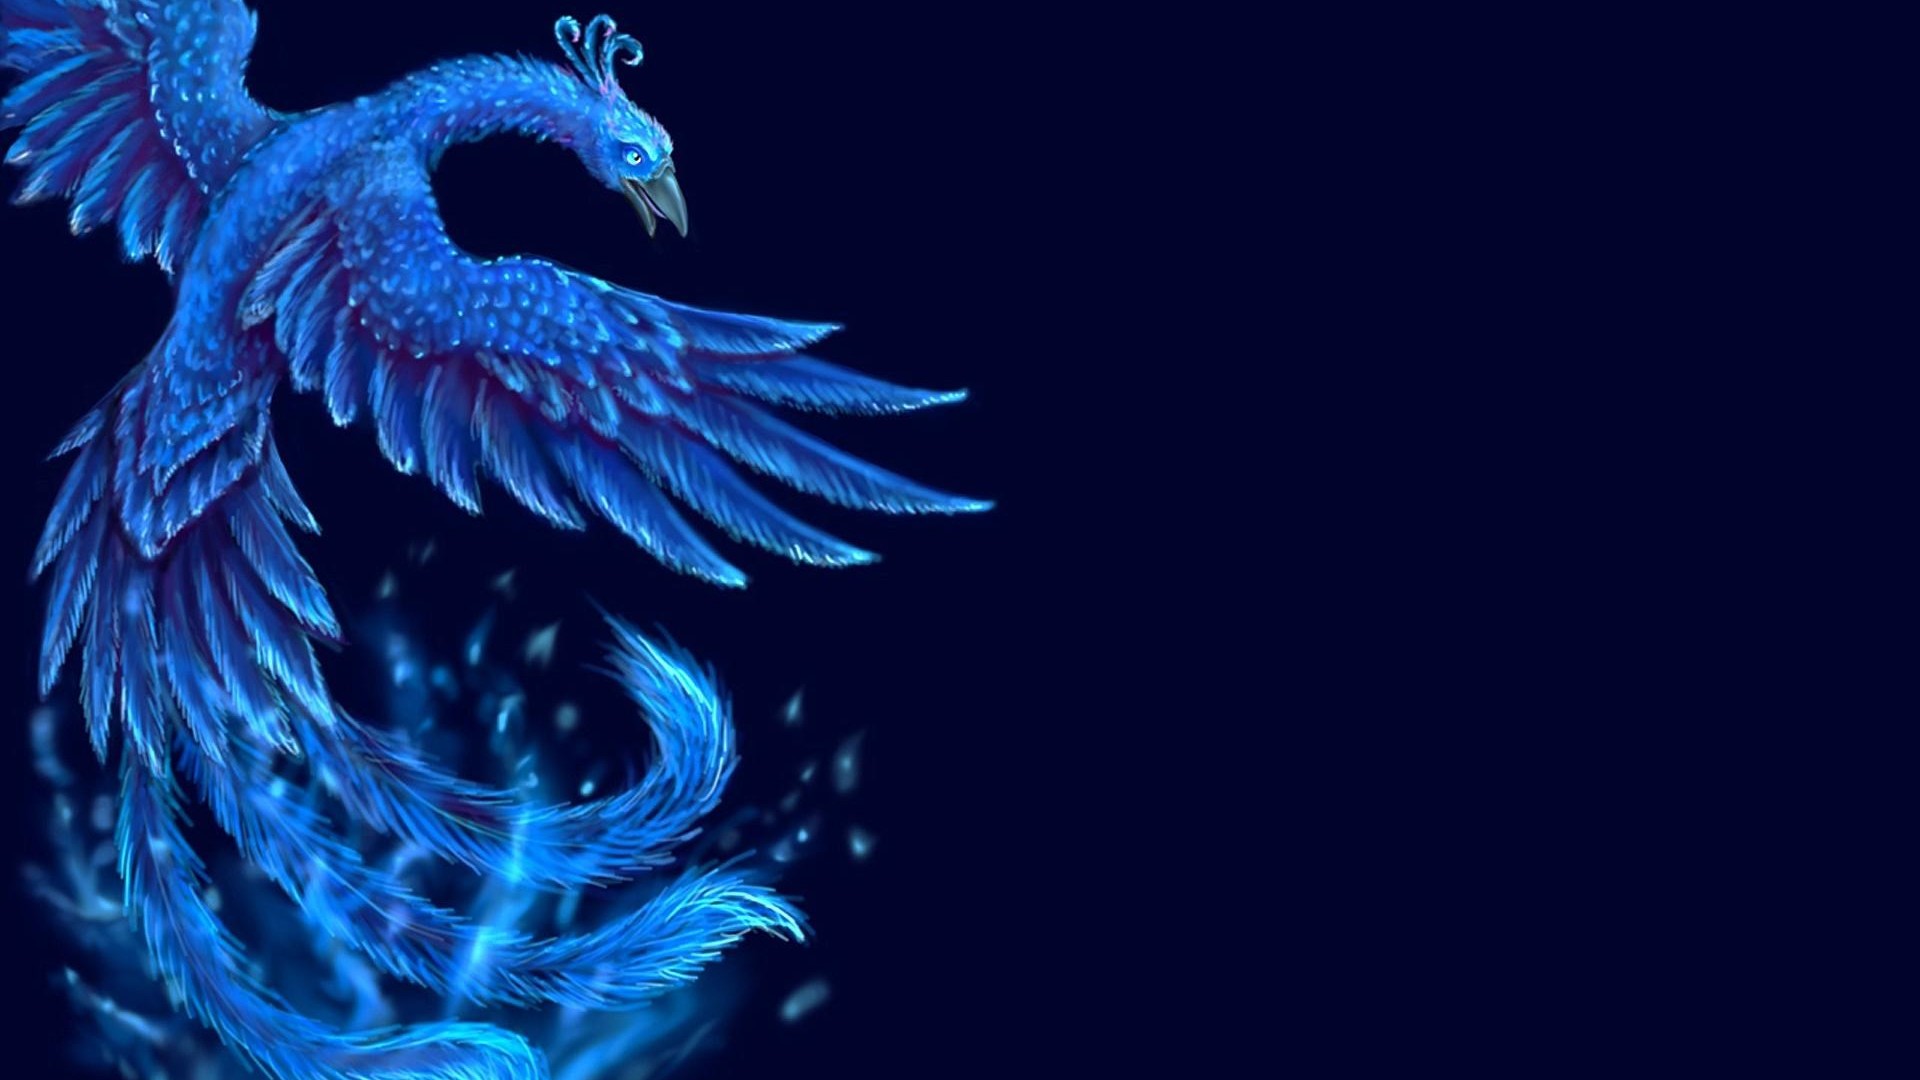 HD Wallpaper Ice Phoenix With Resolution 1920X1080 pixel. You can make this wallpaper for your Desktop Computer Backgrounds, Mac Wallpapers, Android Lock screen or iPhone Screensavers